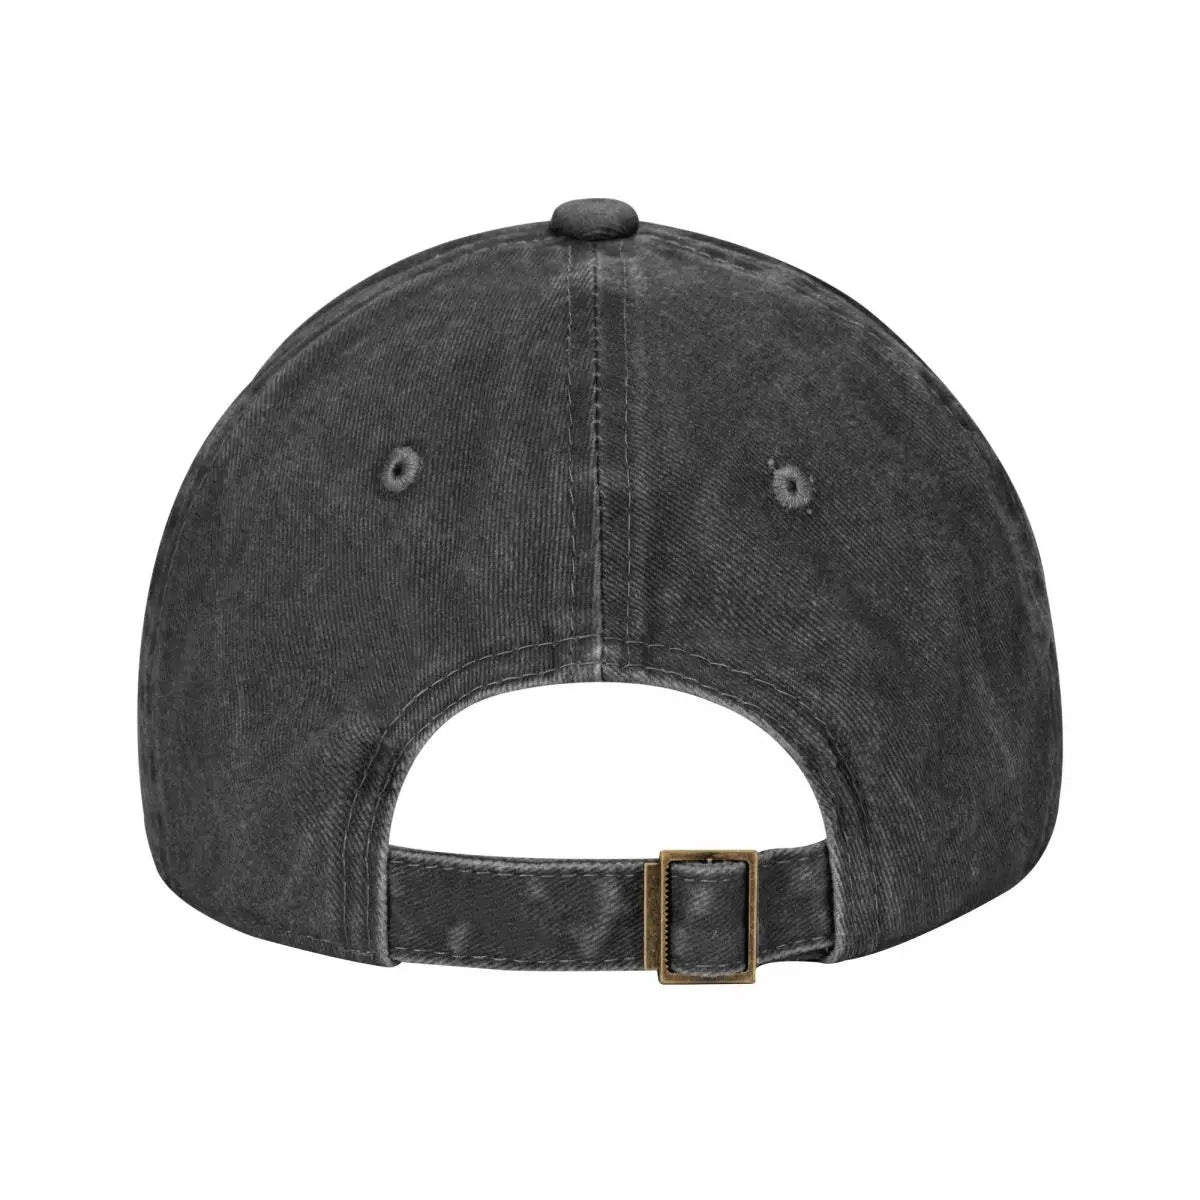 Discover the perfect blend of style and comfort with the Sugiuchi Men’s Baseball Cap